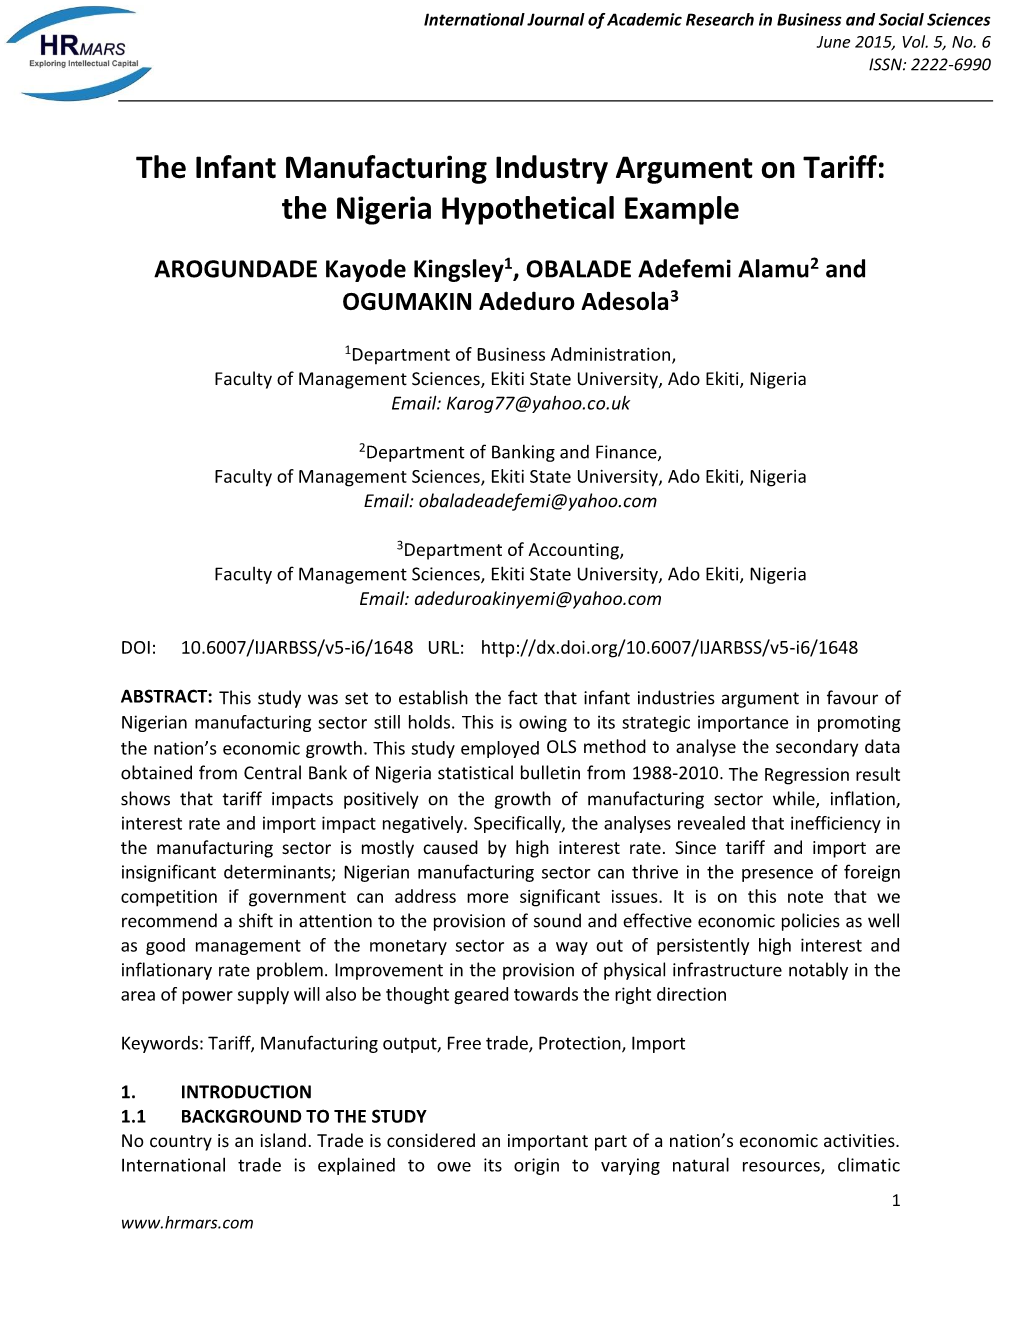 The Infant Manufacturing Industry Argument on Tariff: the Nigeria Hypothetical Example